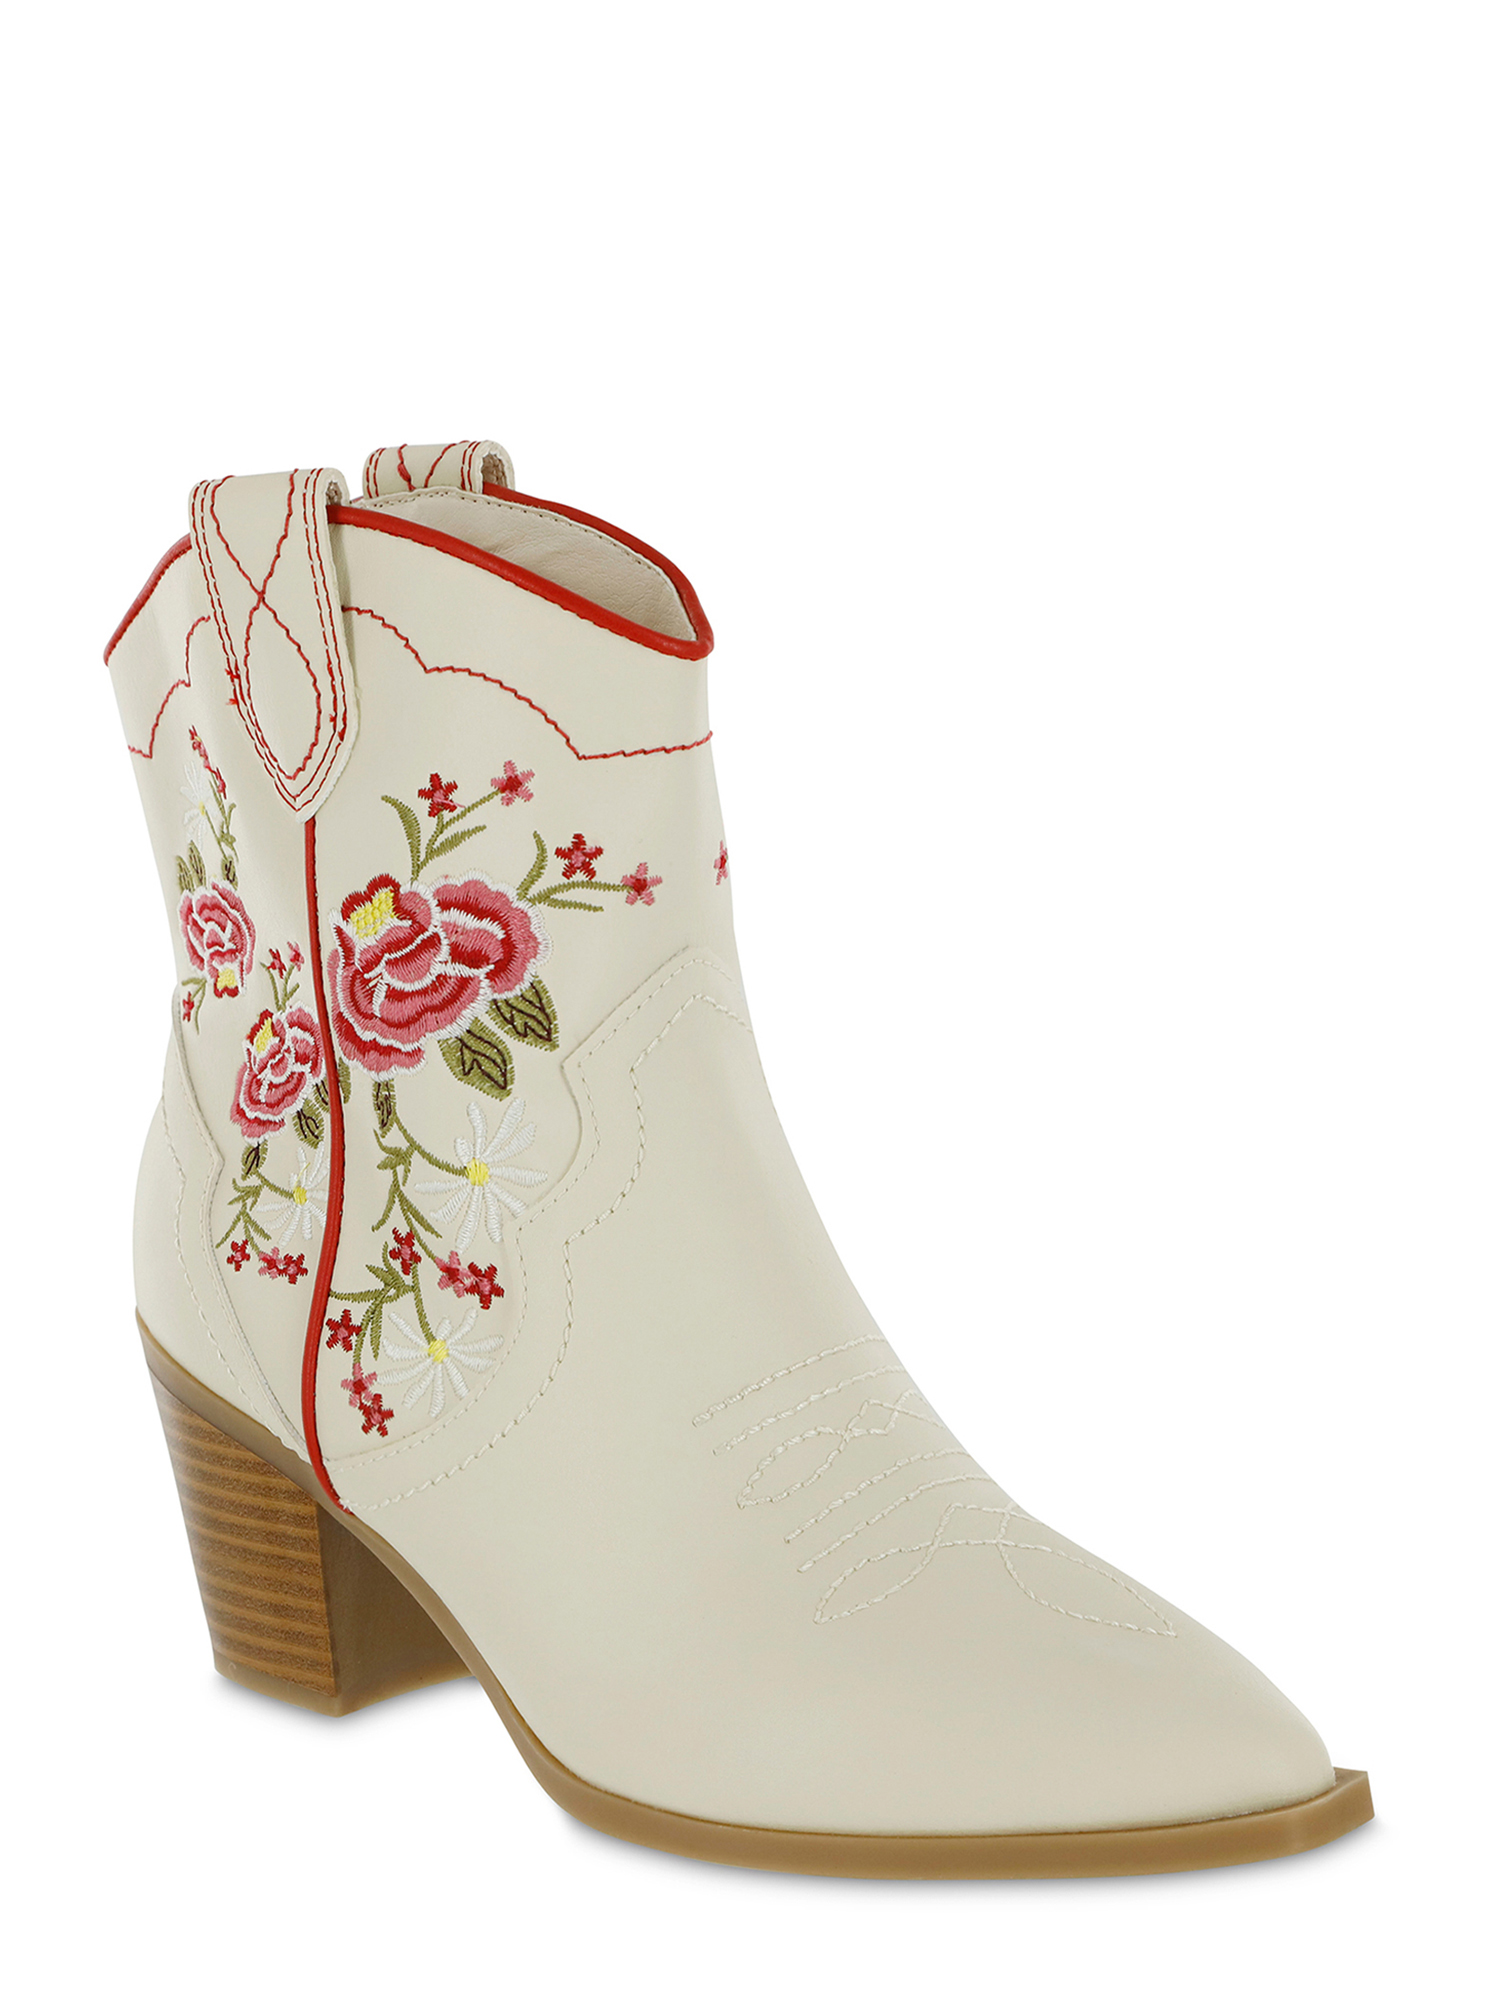 The Pioneer Woman Mommy and Me Embroidered Western Ankle Boot, Women's - image 1 of 7